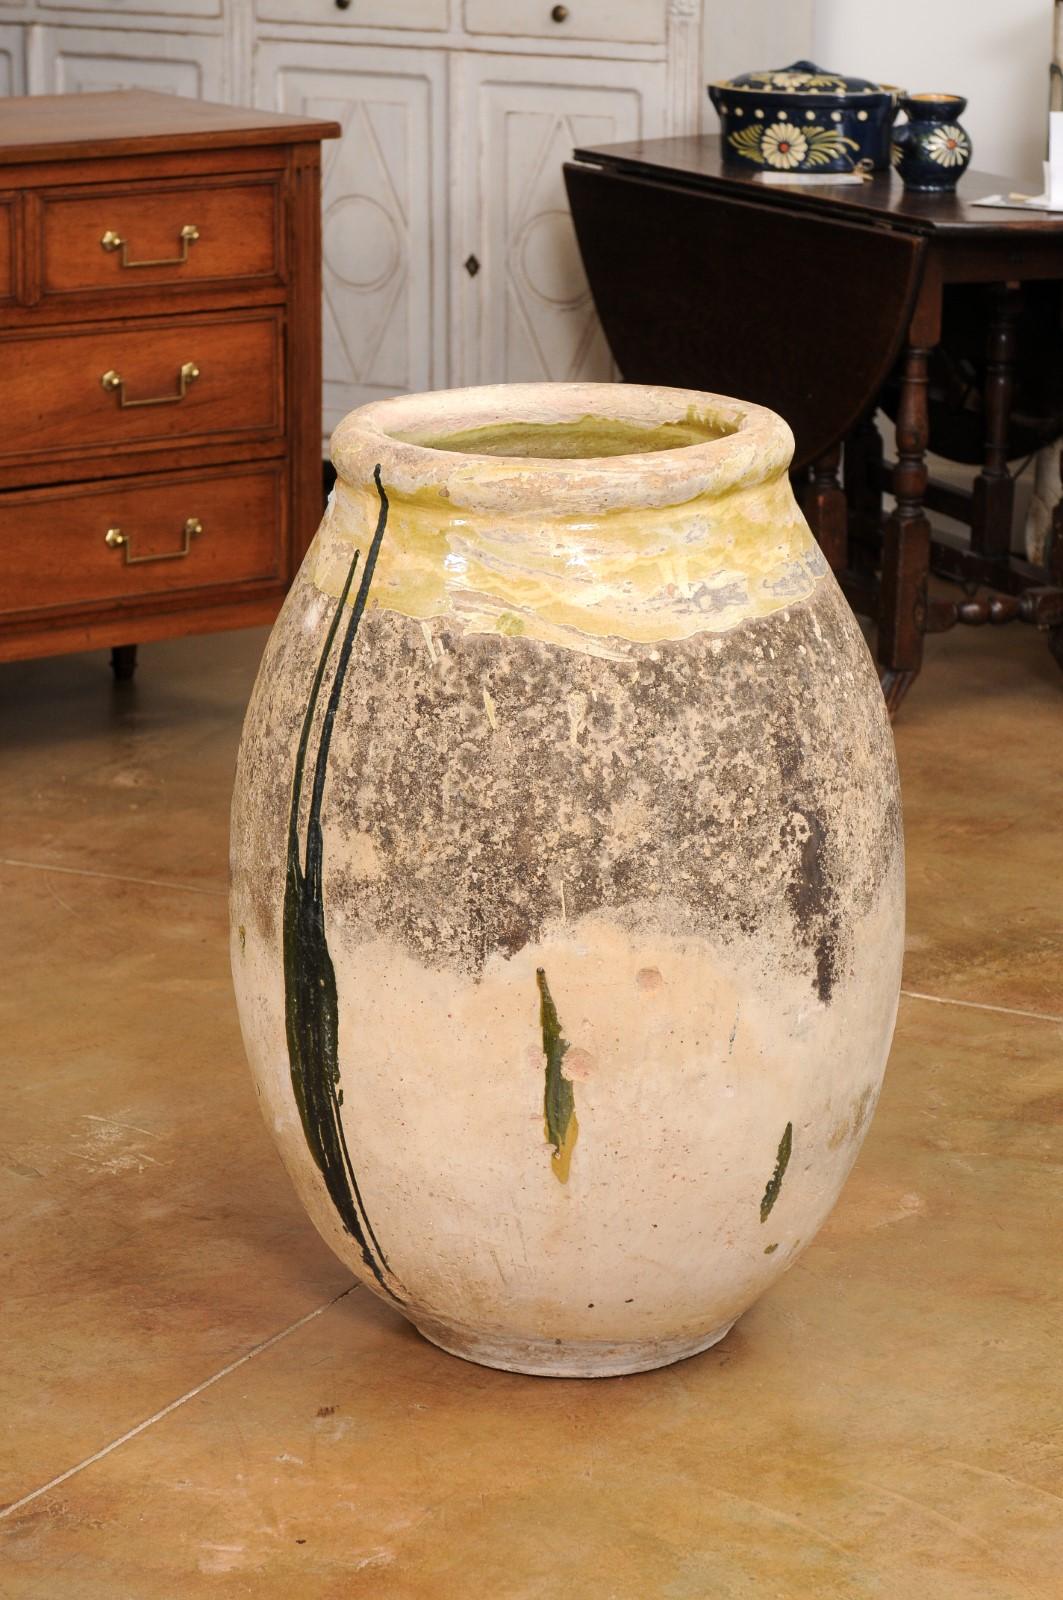 French 19th Century Terracotta Biot Jar with Yellow Glaze and Rustic Character For Sale 3